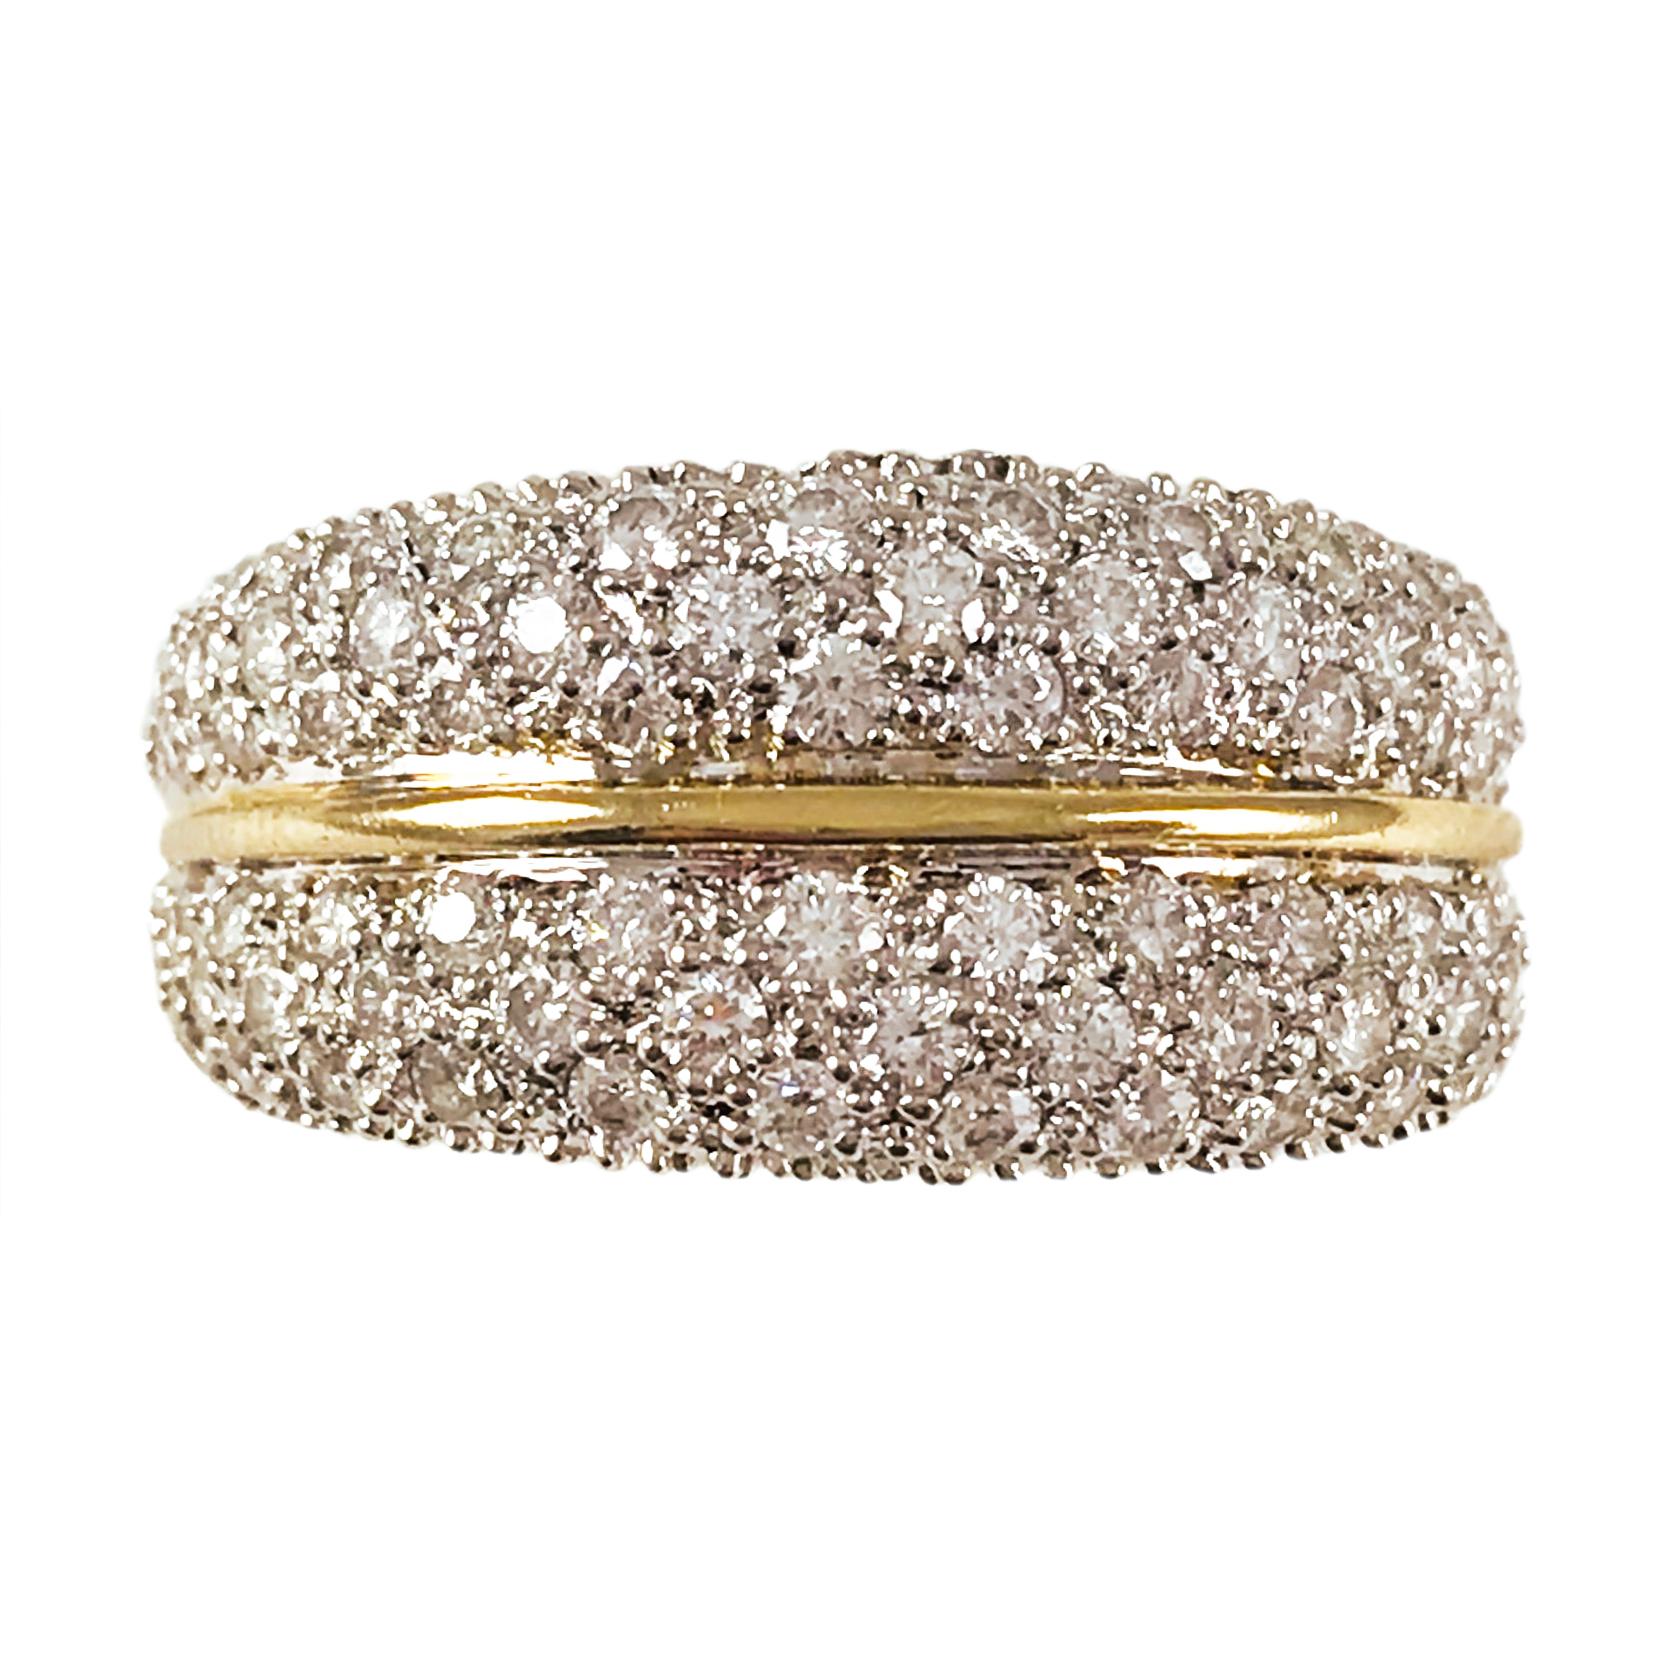 Two-tone 14 Karat Gold Diamond Pavé Ring. Elegant and sophisticated with double pave bands and a thin strip of yellow gold to visually enhance the design. The diamonds twinkle in the light and have a total carat weight of 1.00ctw. Ring size is 7 1/4.